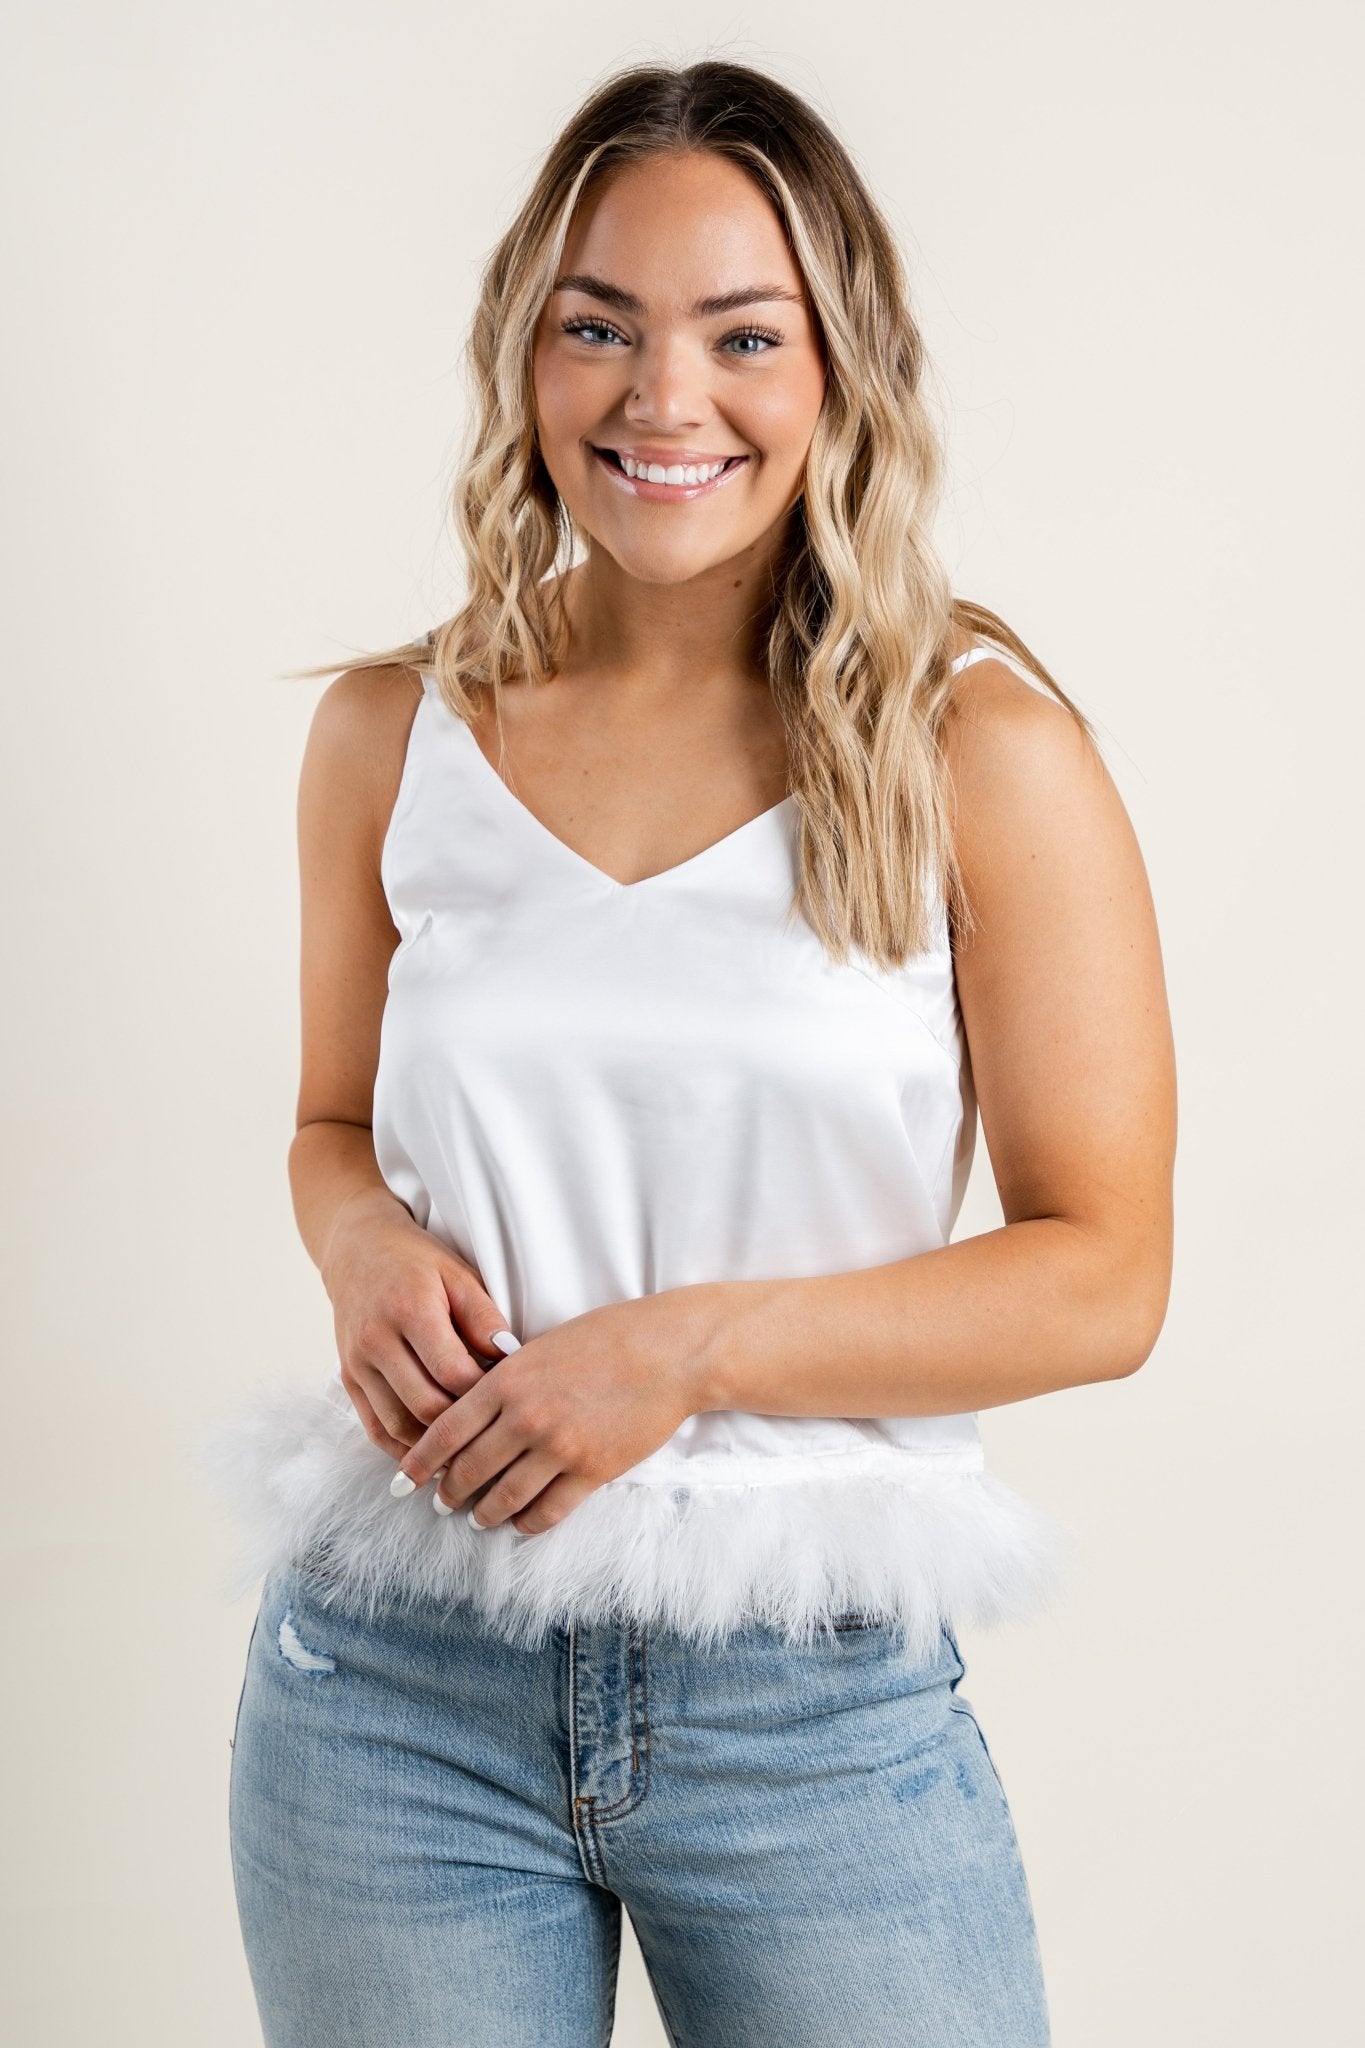 Feather trim cami tank top ivory - Trendy Tank Top - Fun Wedding Party Outfits at Lush Fashion Lounge Boutique in Oklahoma City